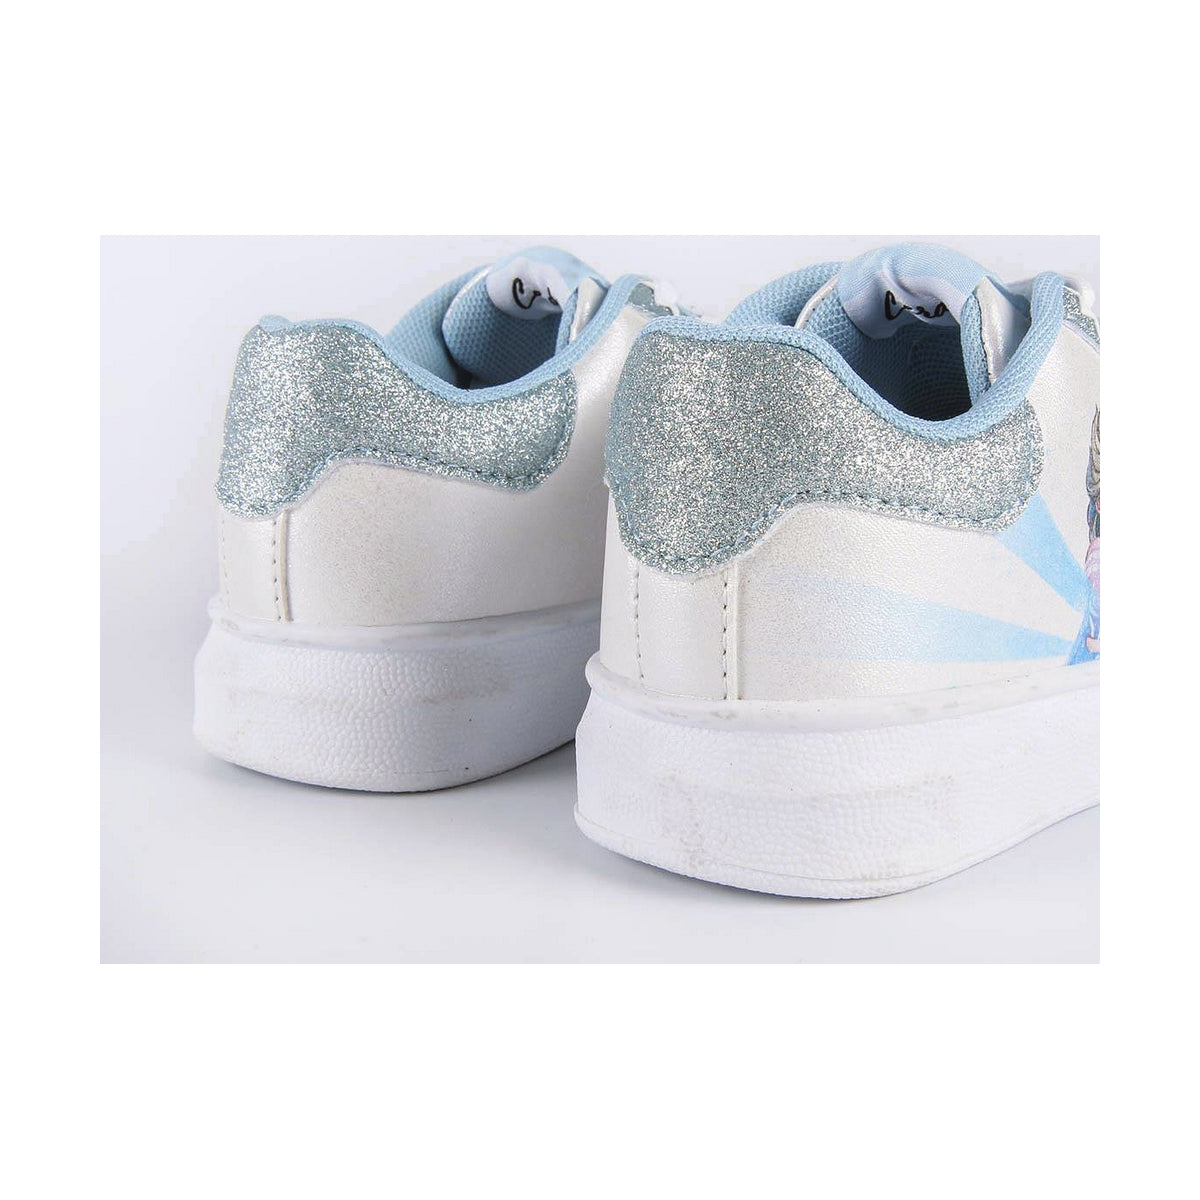 Sports Shoes for Kids Frozen Fantasy Silver White